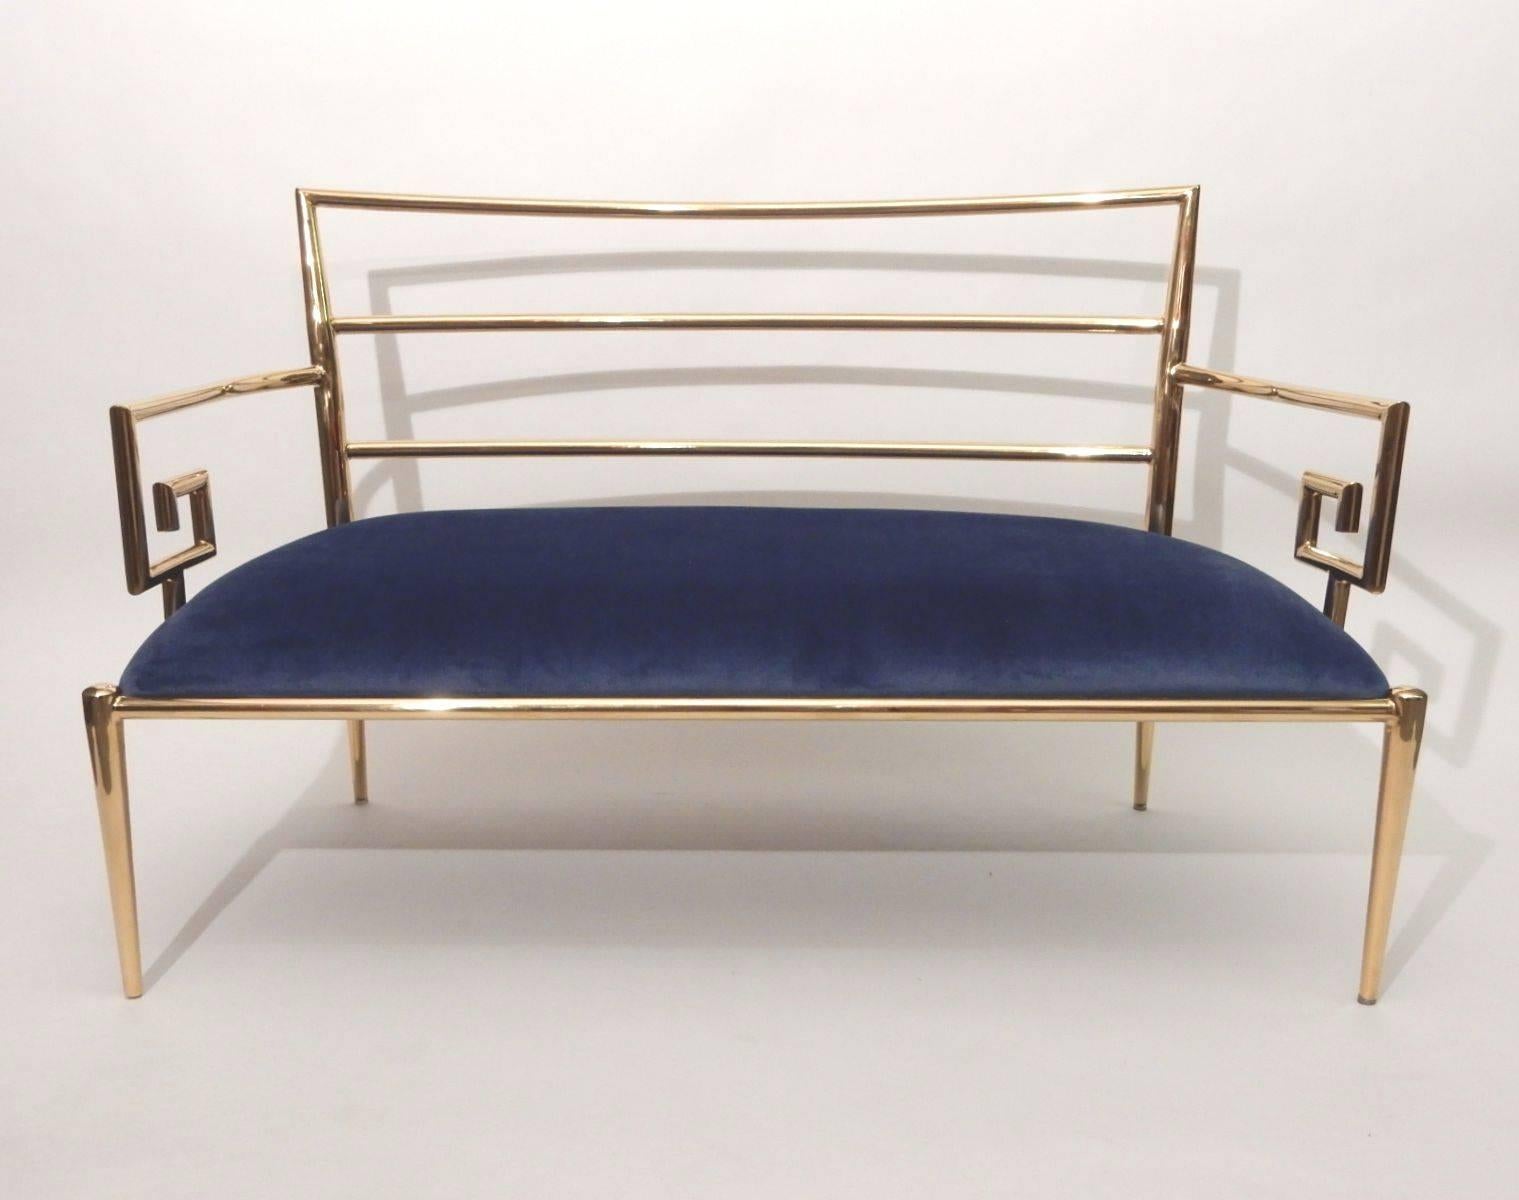 This is an amazing solid brass settee with Greek key arm design, tapered legs and seamless welds.
Upholstered in Royal blue velvet.
Exceptional craftsmanship, possibly by Mastercraft Furniture.